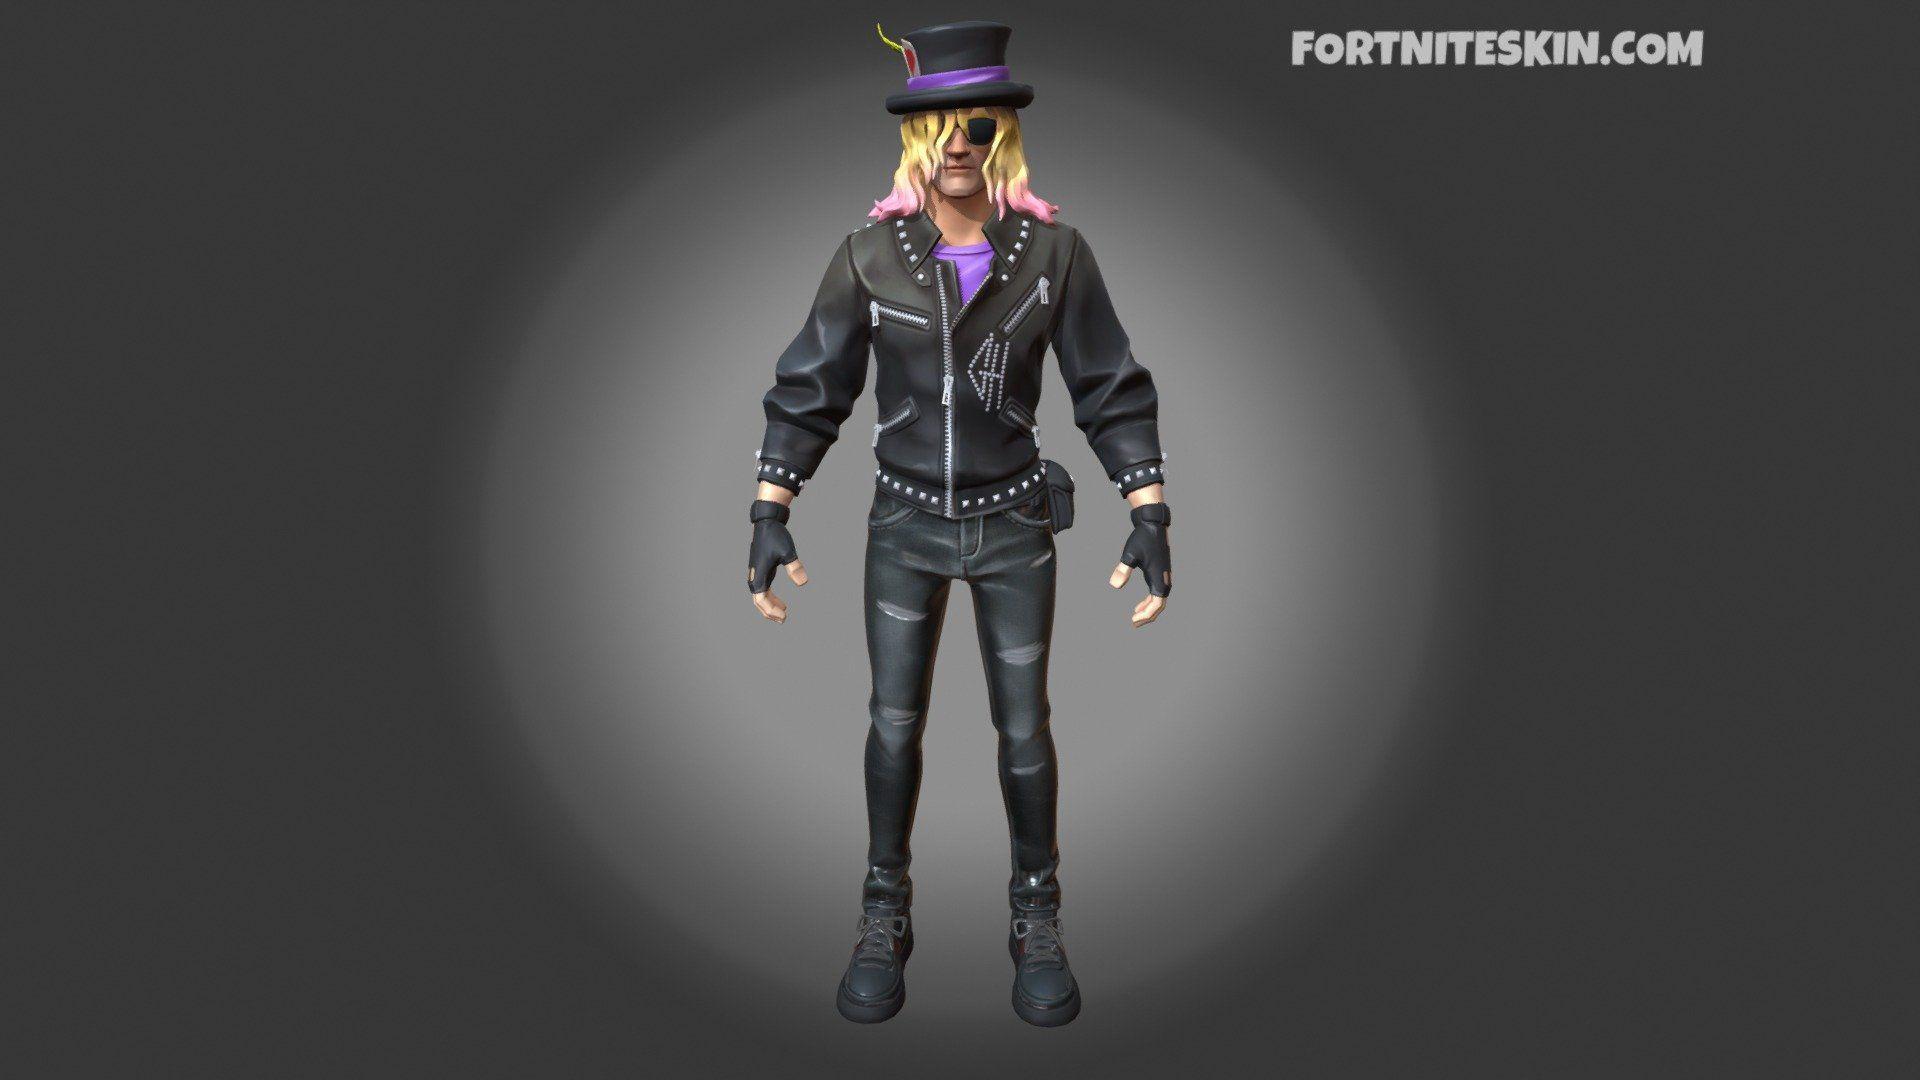 3D Models Tagged Fortnite Stage Slayer Outfit